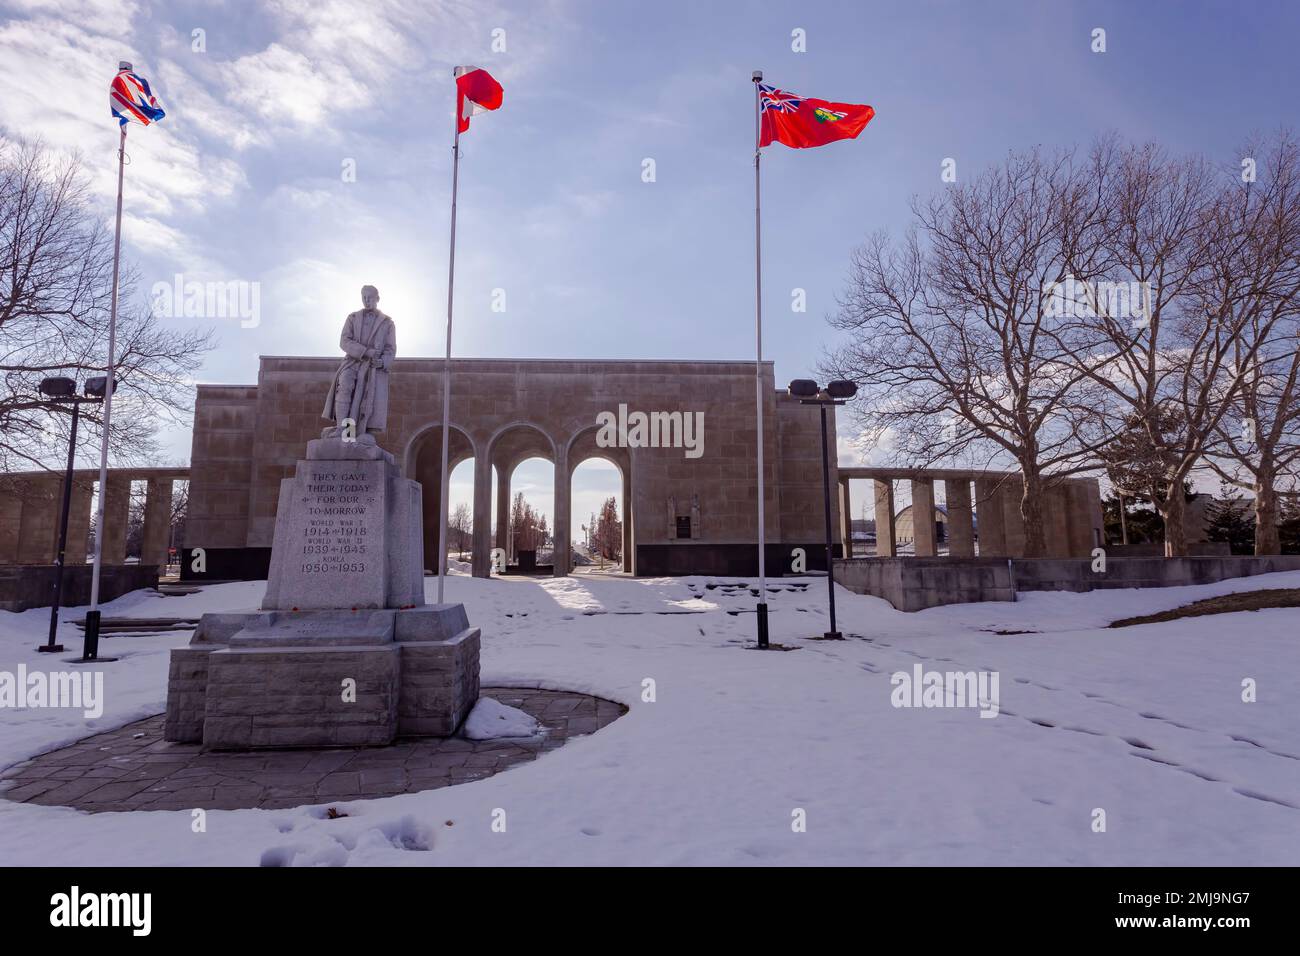 A cenotaph near the Mather Arch honors fallen soldiers from both world wars and the Korean War. Stock Photo